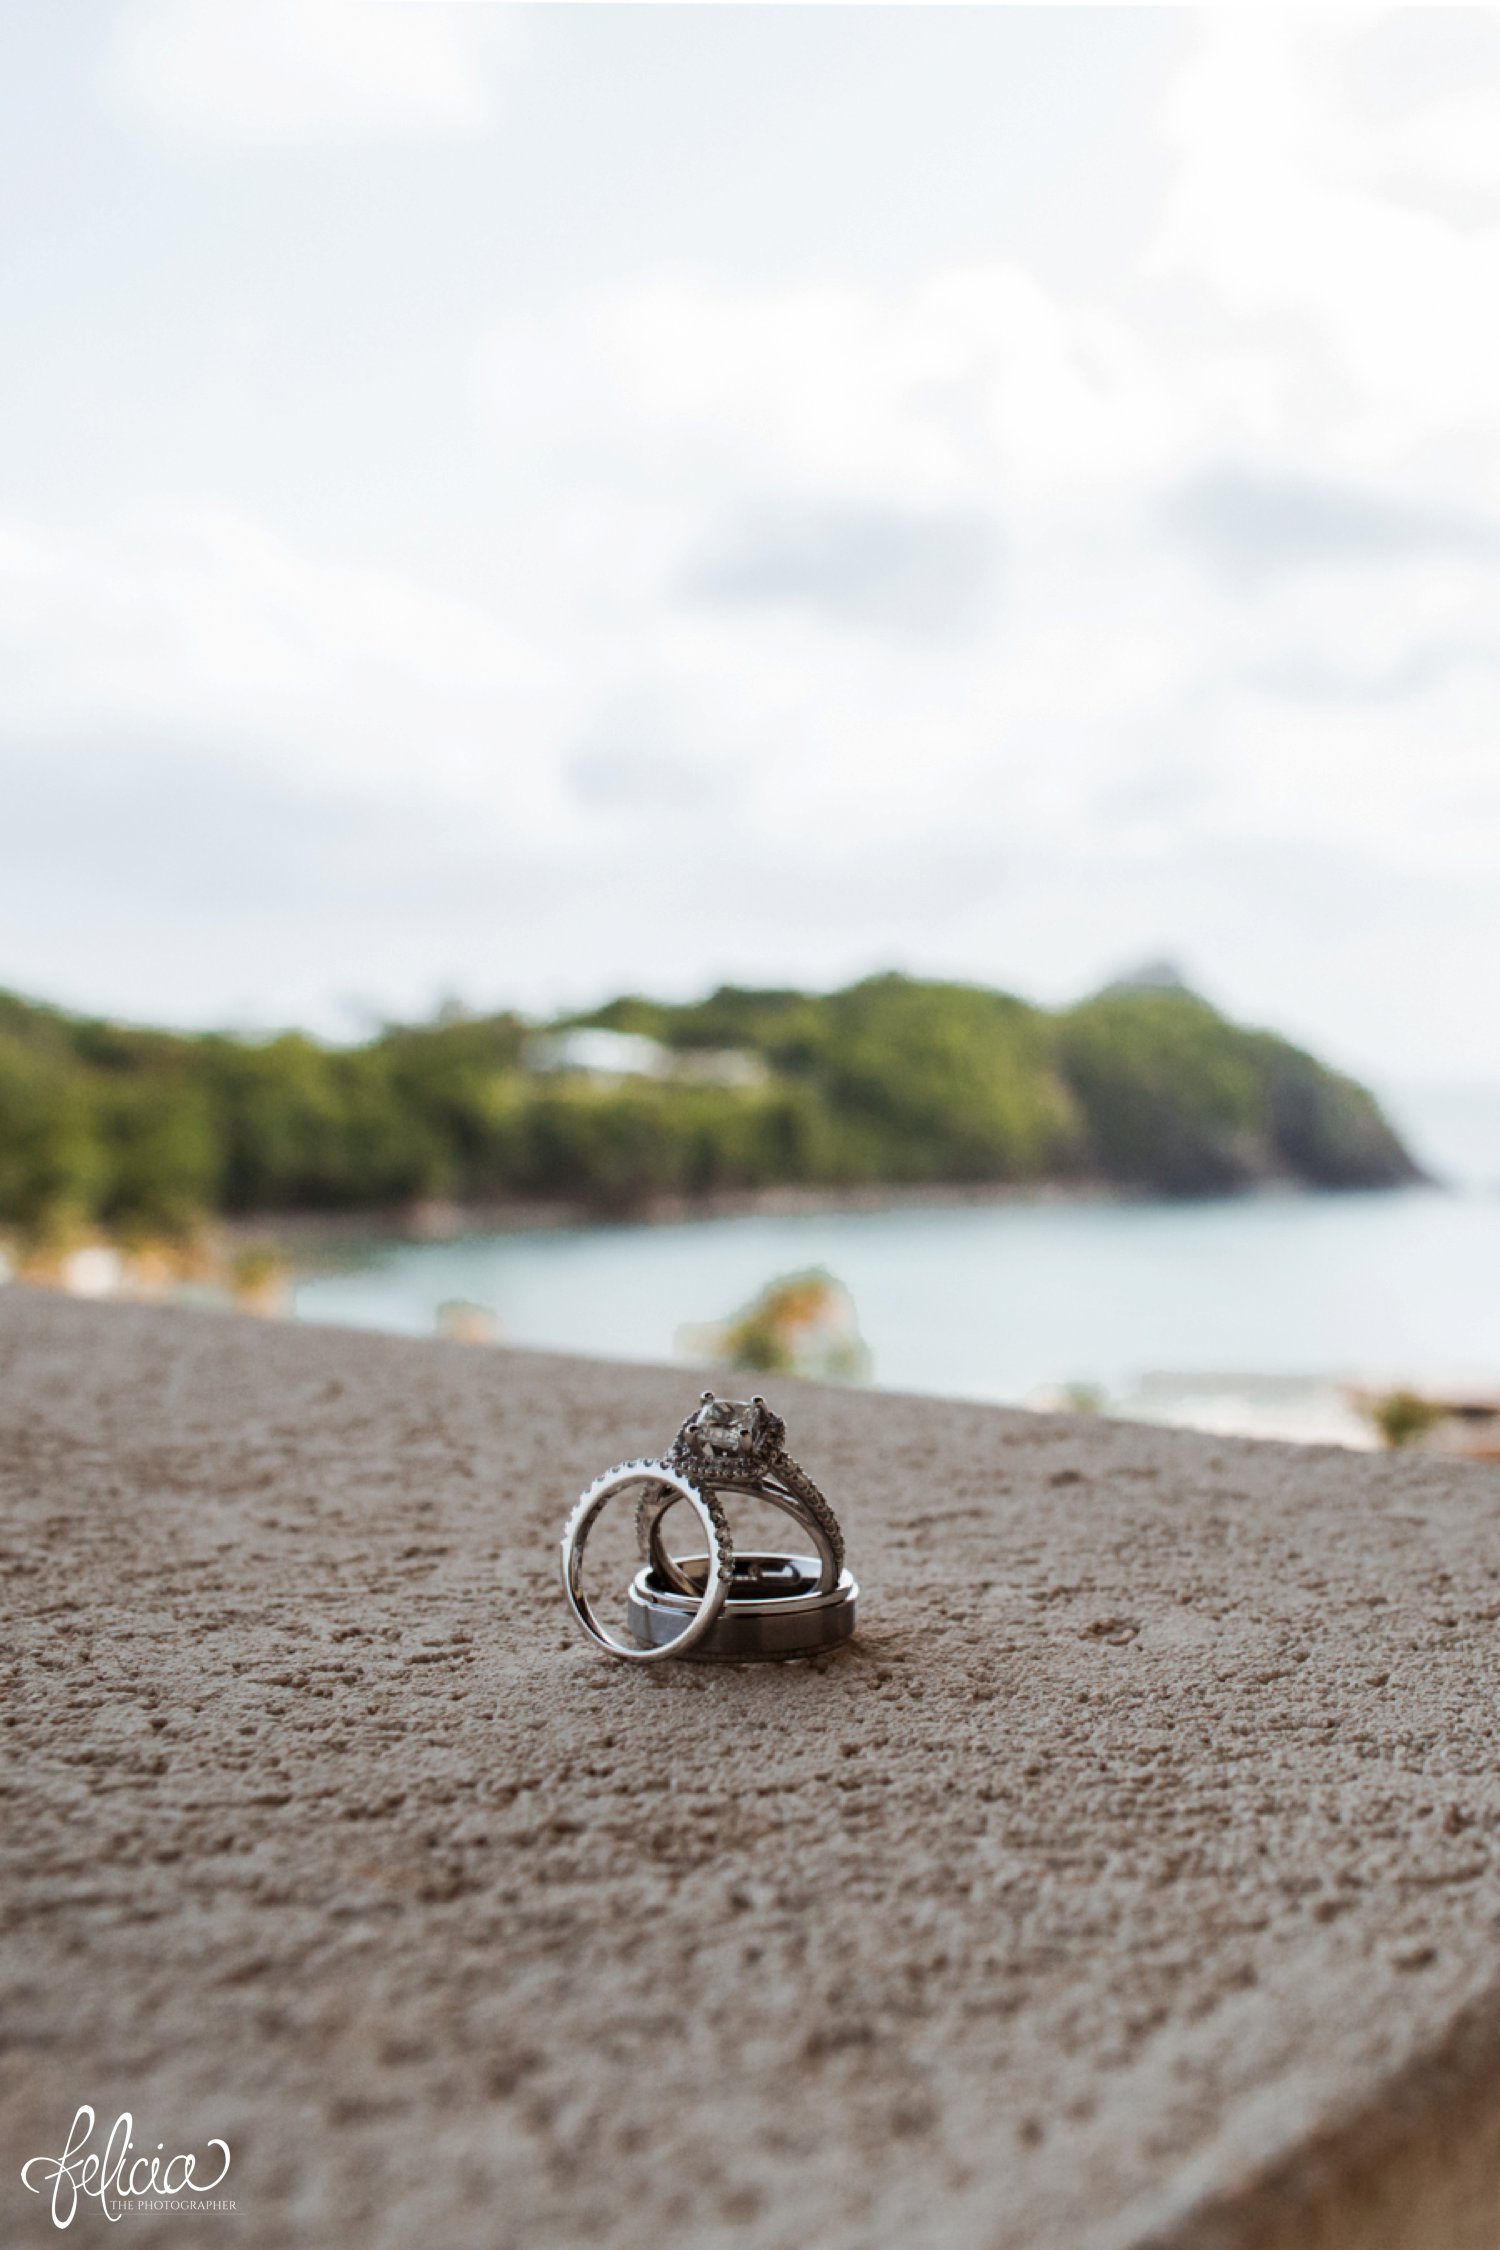   images by feliciathephotographer.com | destination wedding photographer | st lucia | l&s travel | the Royalton | getting ready | details | diamond halo setting engagement ring | silver band | beach | blue waters | nature | 